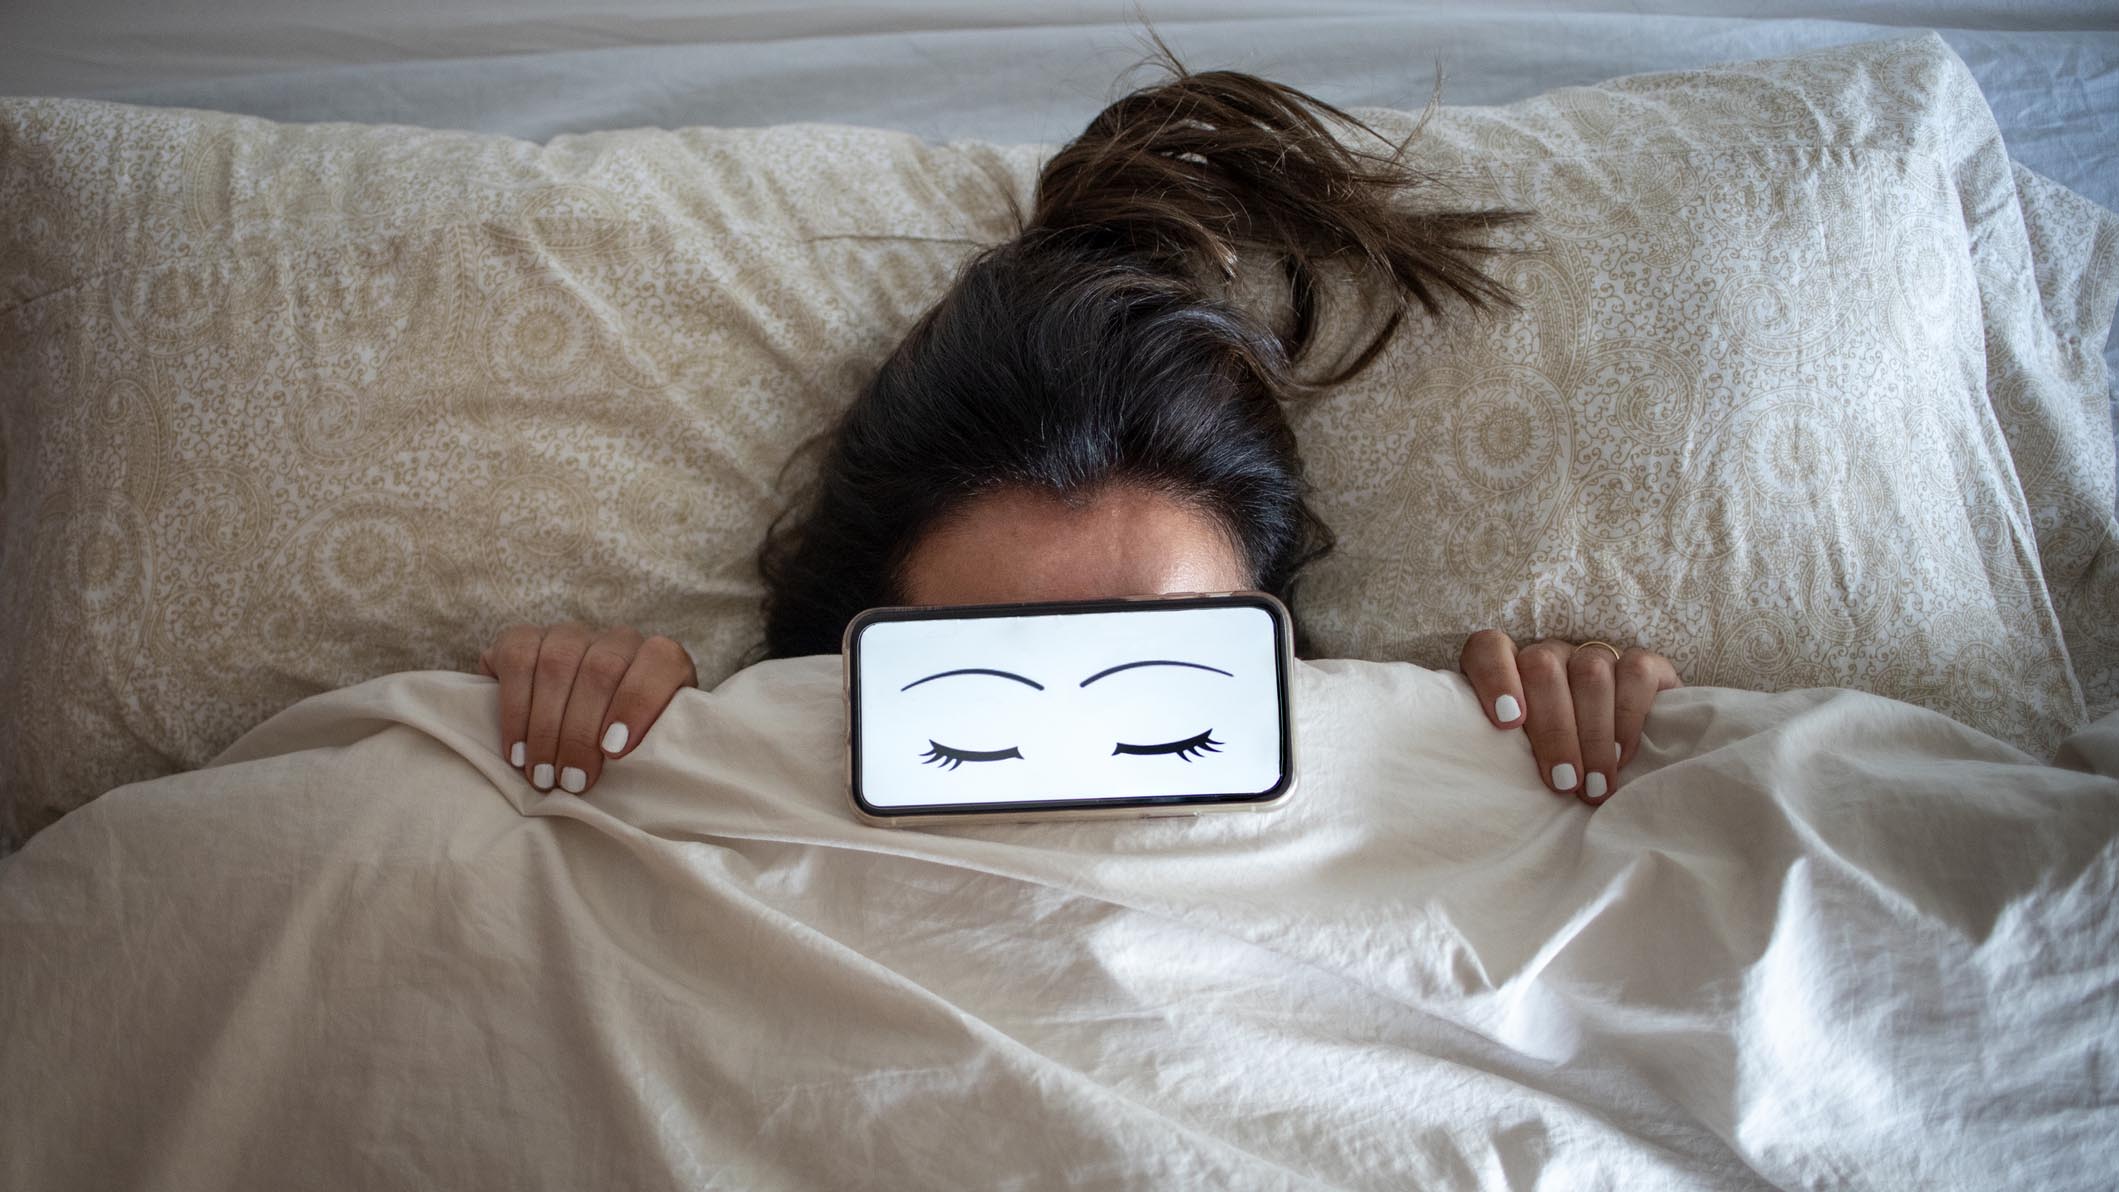 A woman lies in bed with a phone covering her eyes